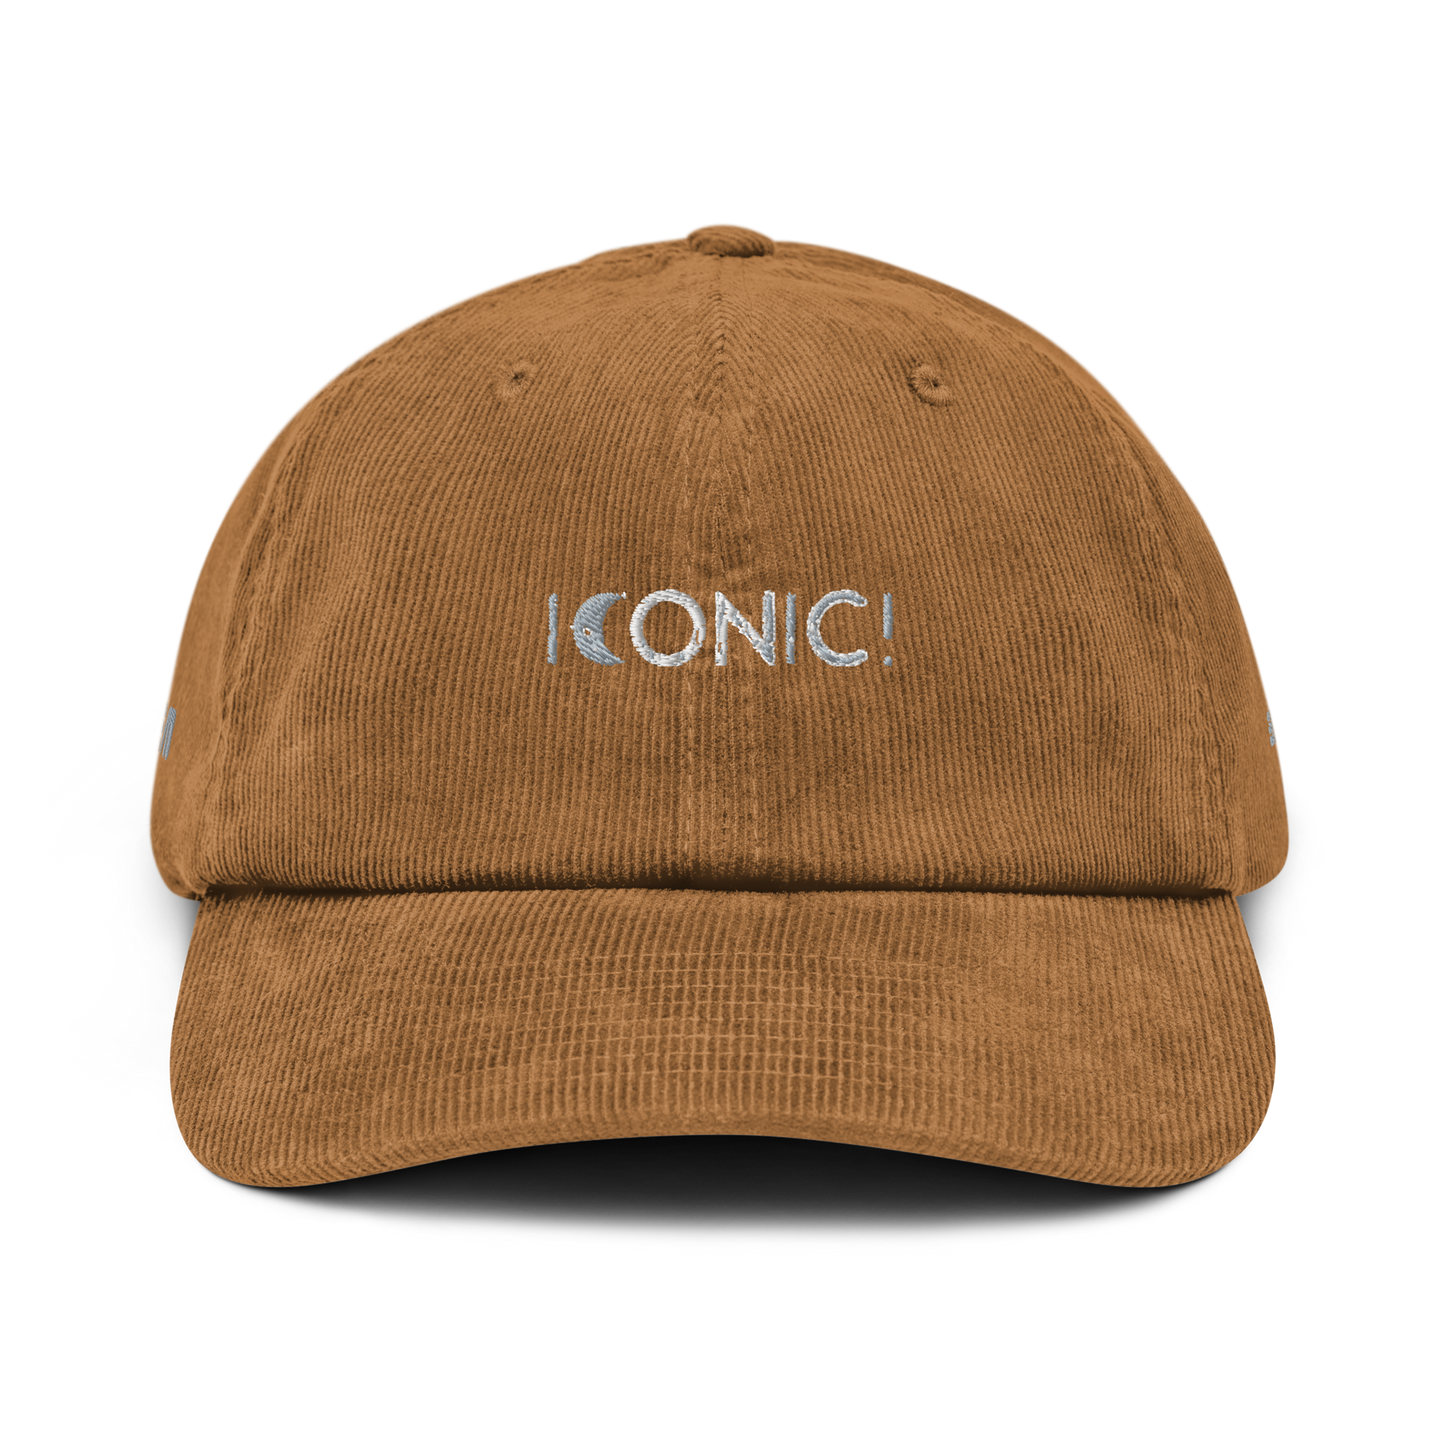 Iconic! Embroidered Corduroy Hat